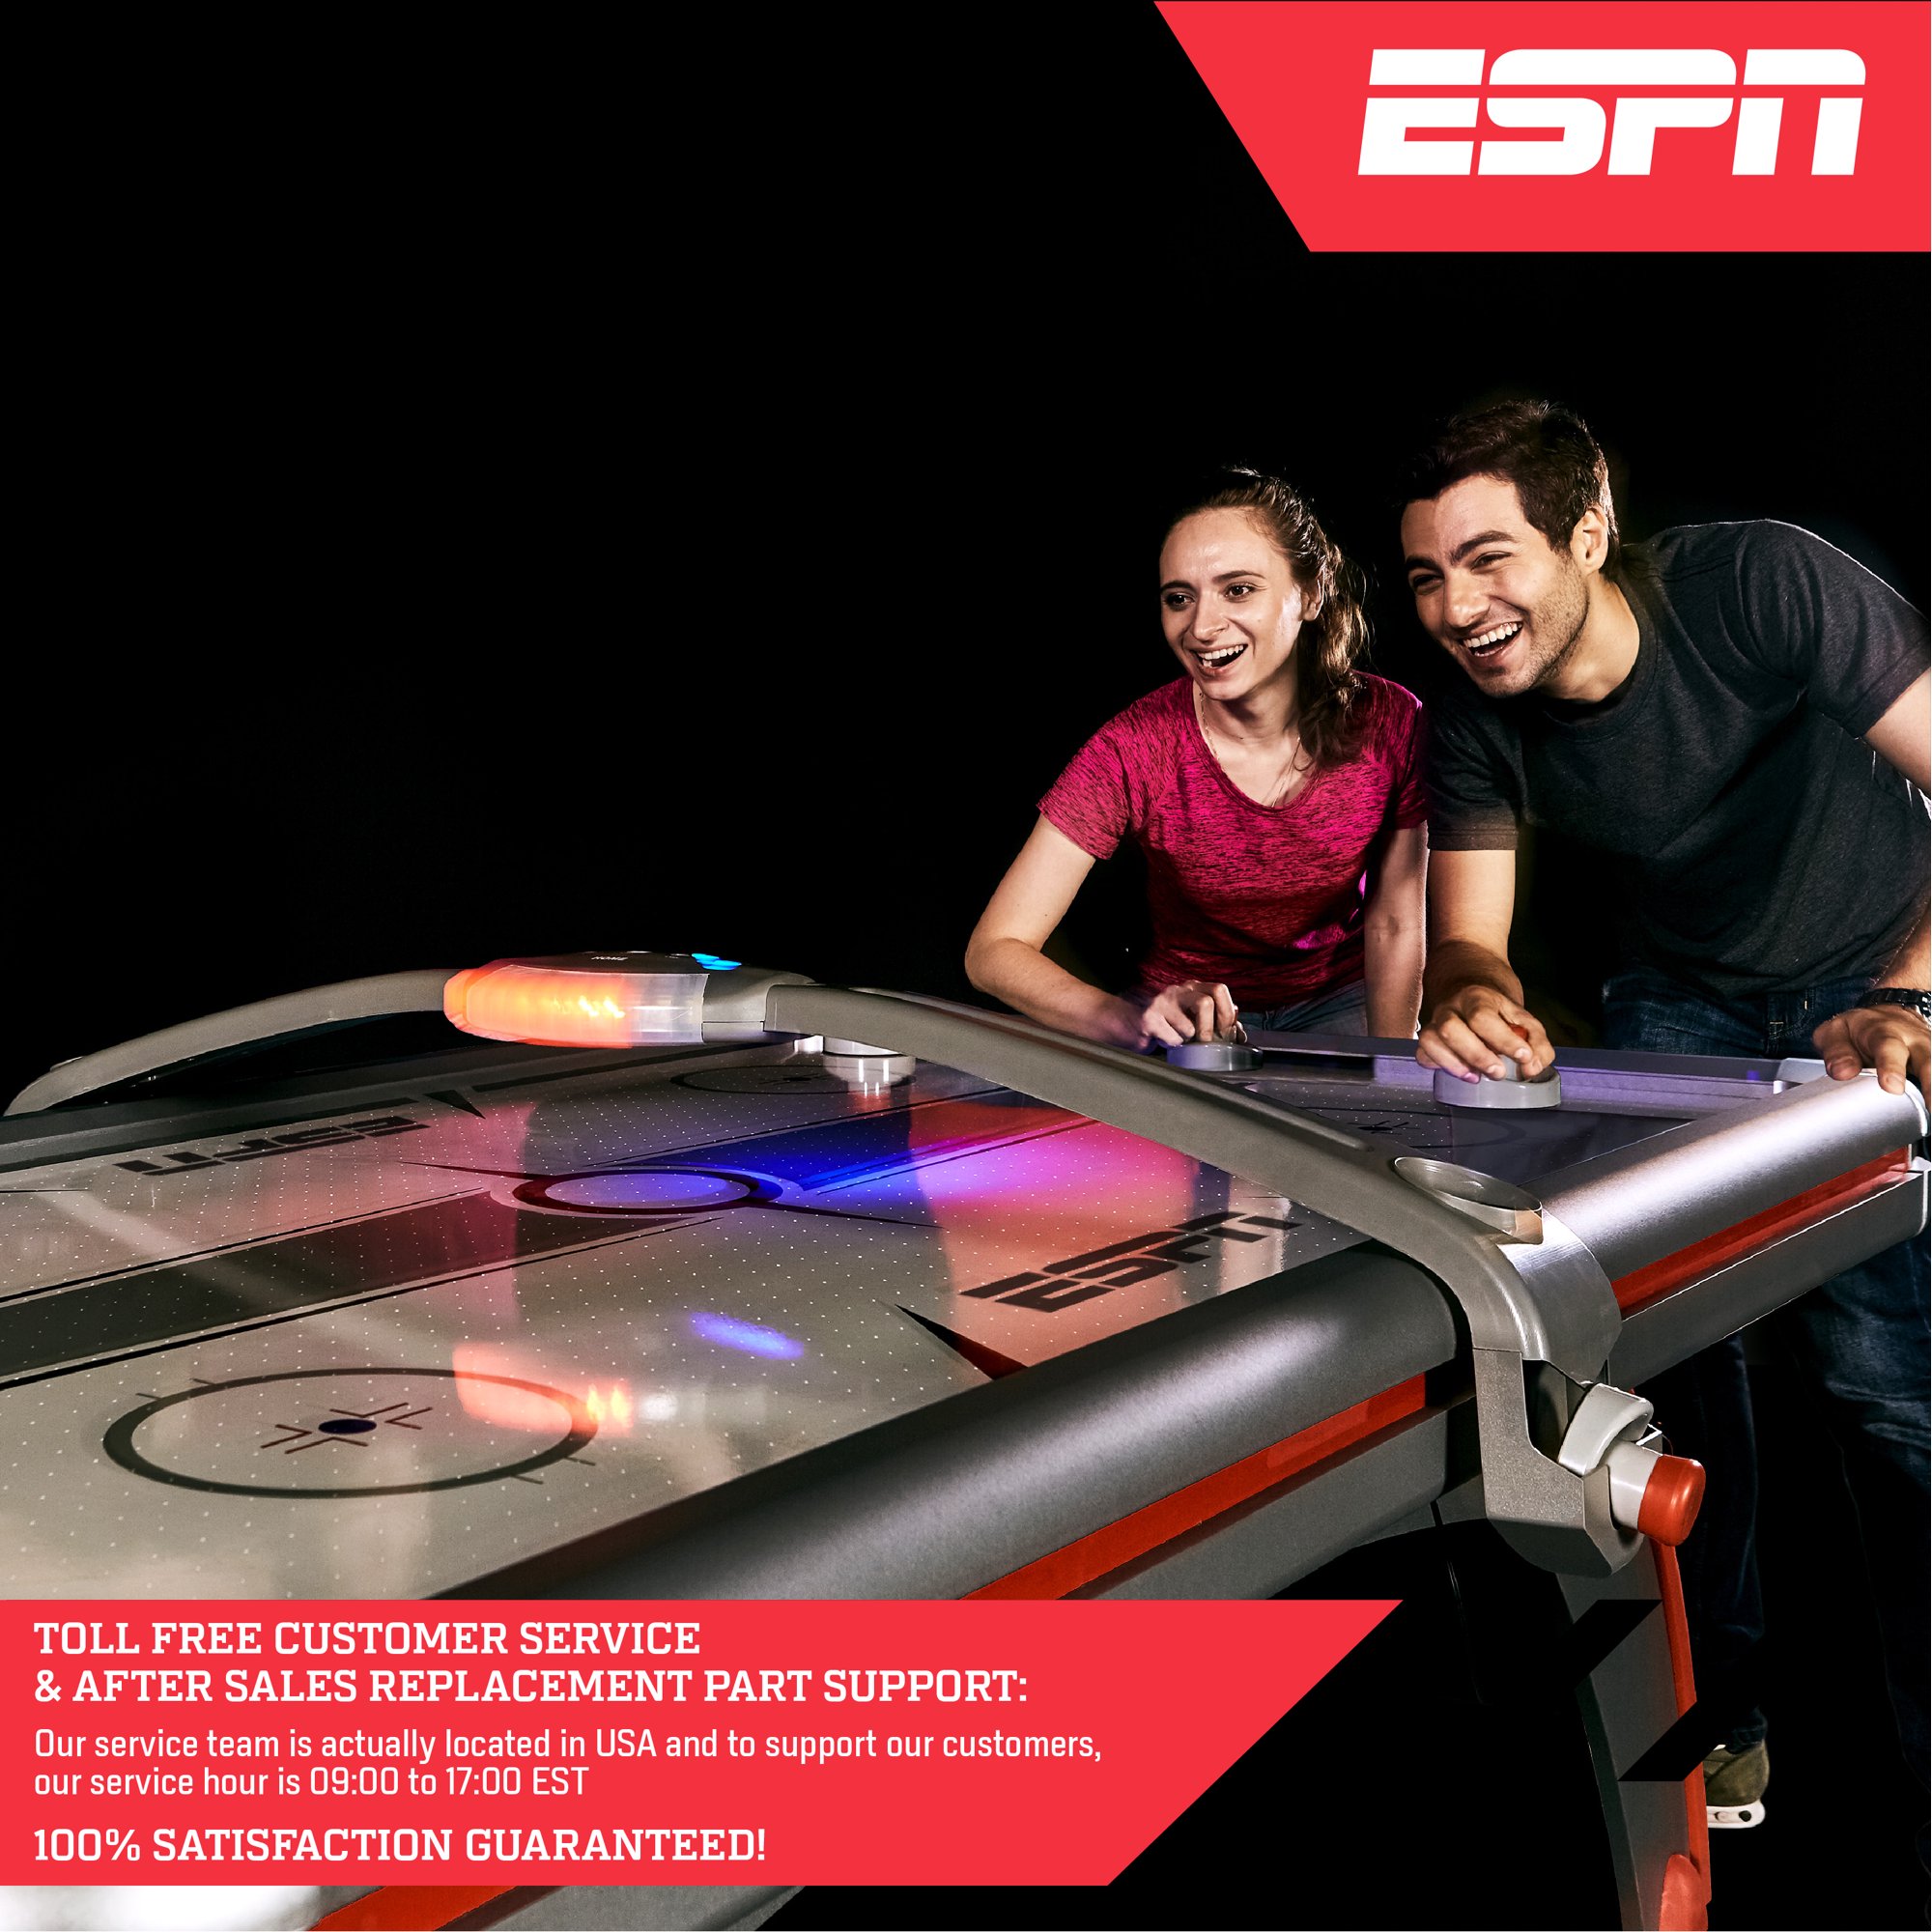 One pair of players smiling while playing ESPN hockey table in a dark room